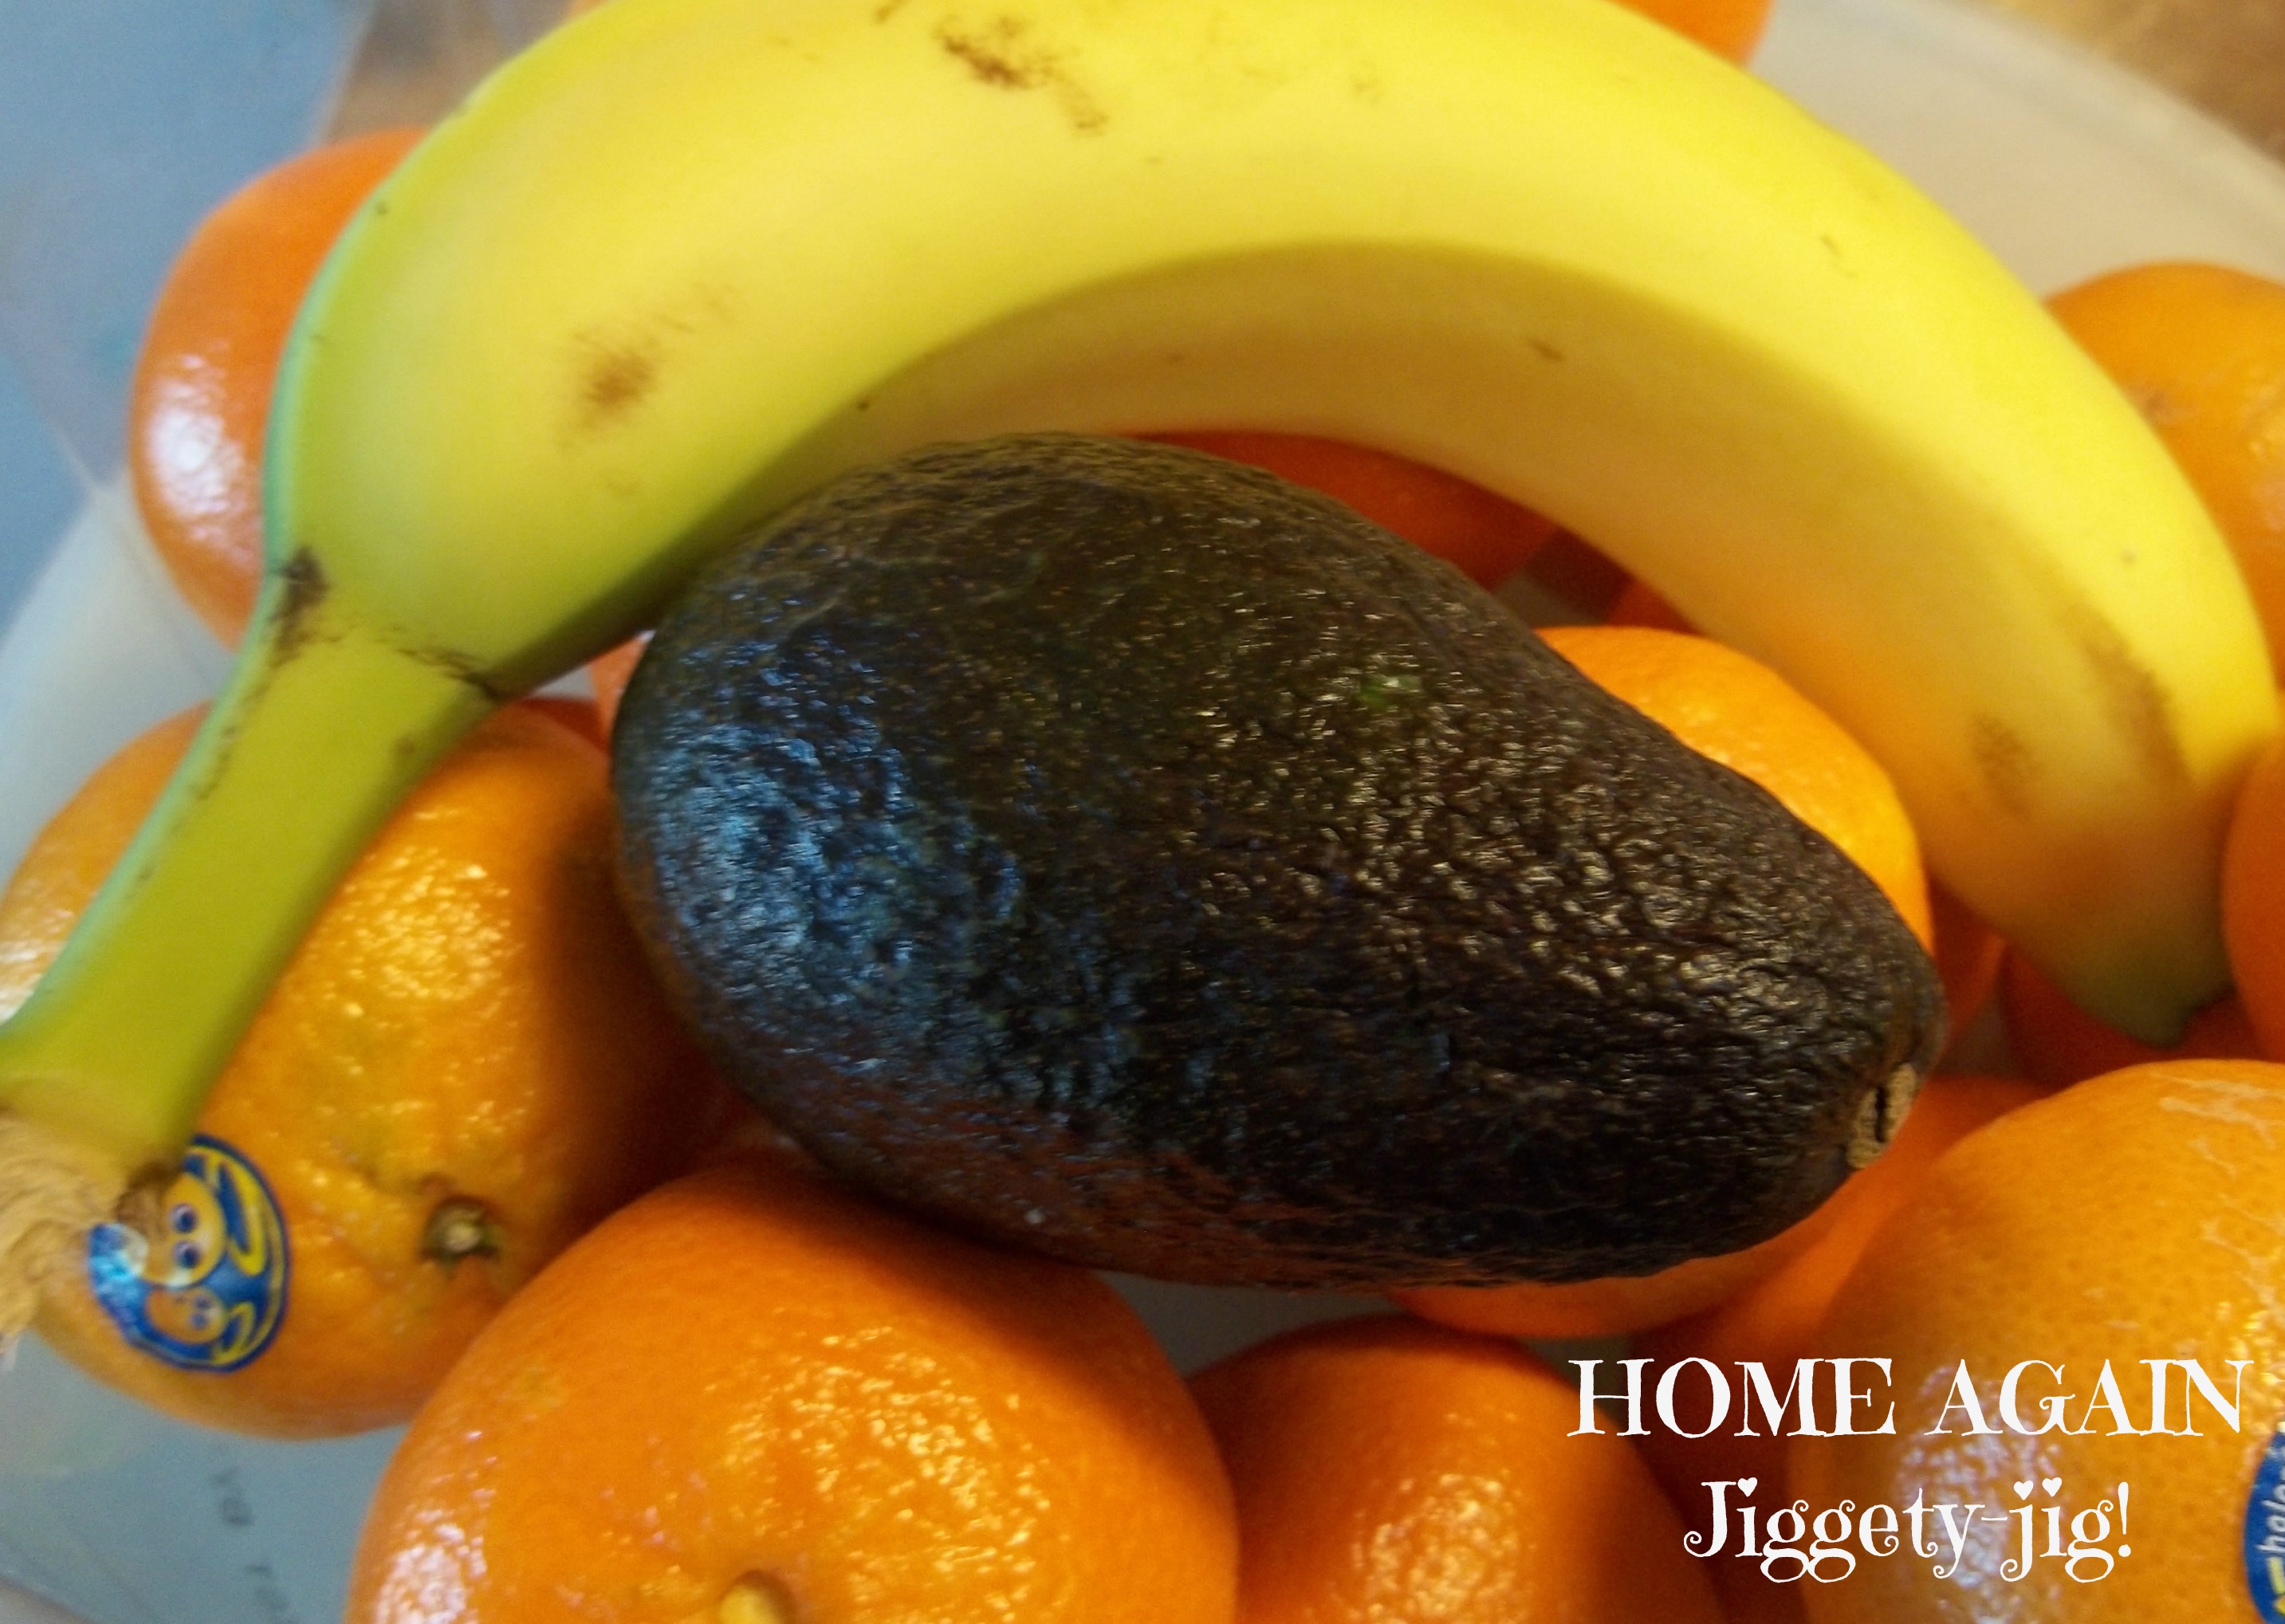 HOW TO RIPEN AN AVOCADO QUICKLY AND KEEP IT READY TO EAT